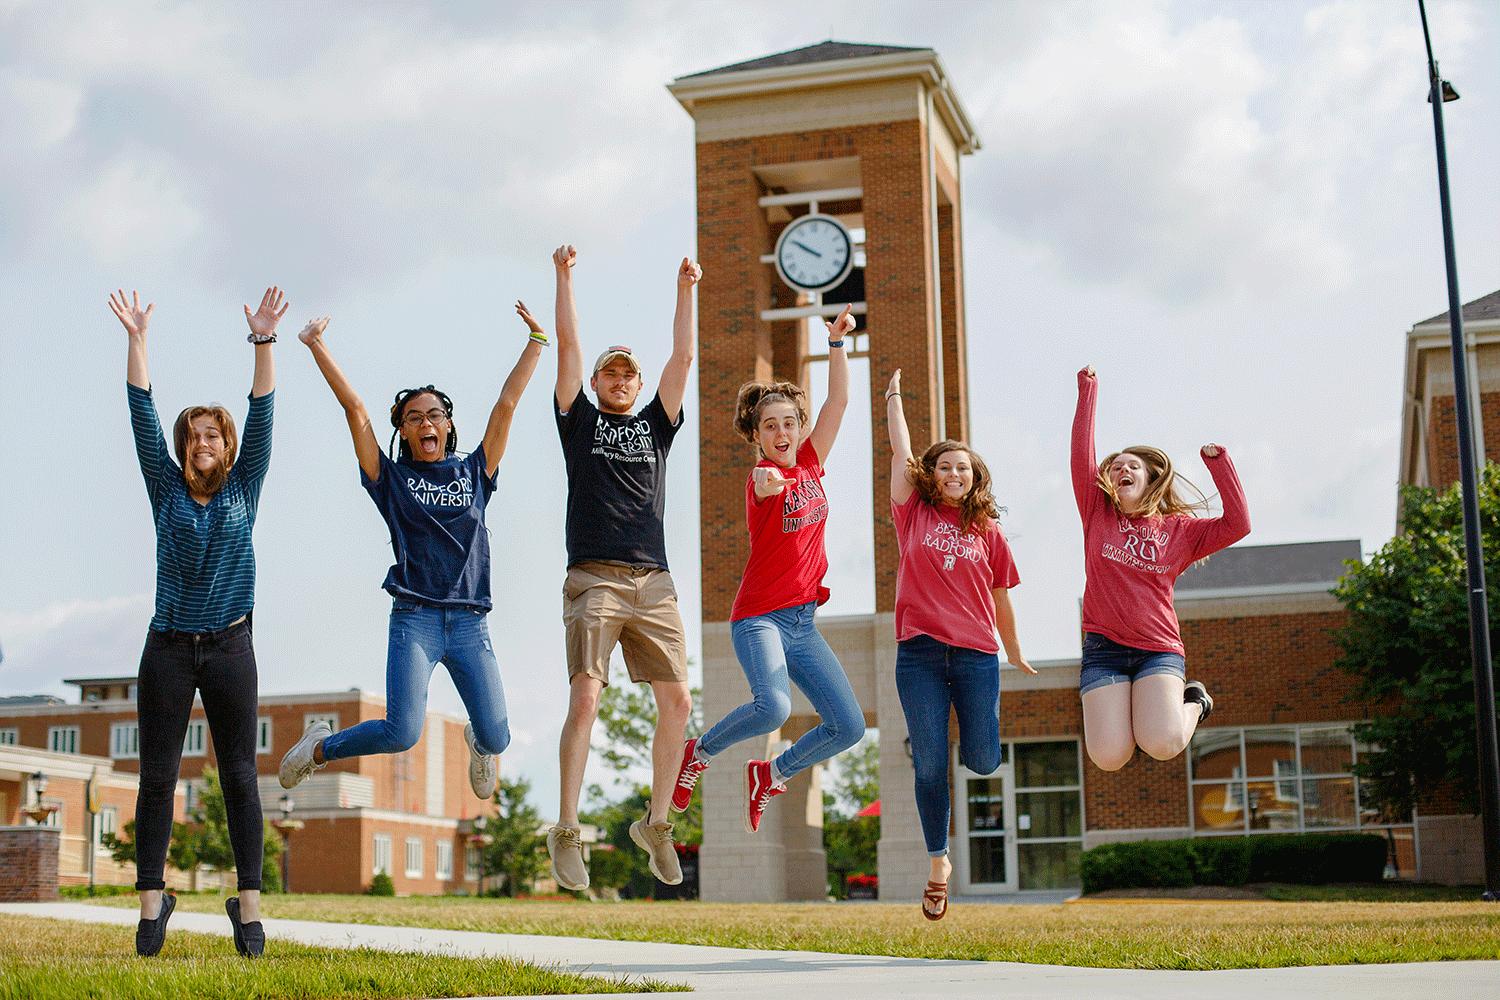 Students jumping in the air for a fun photo.